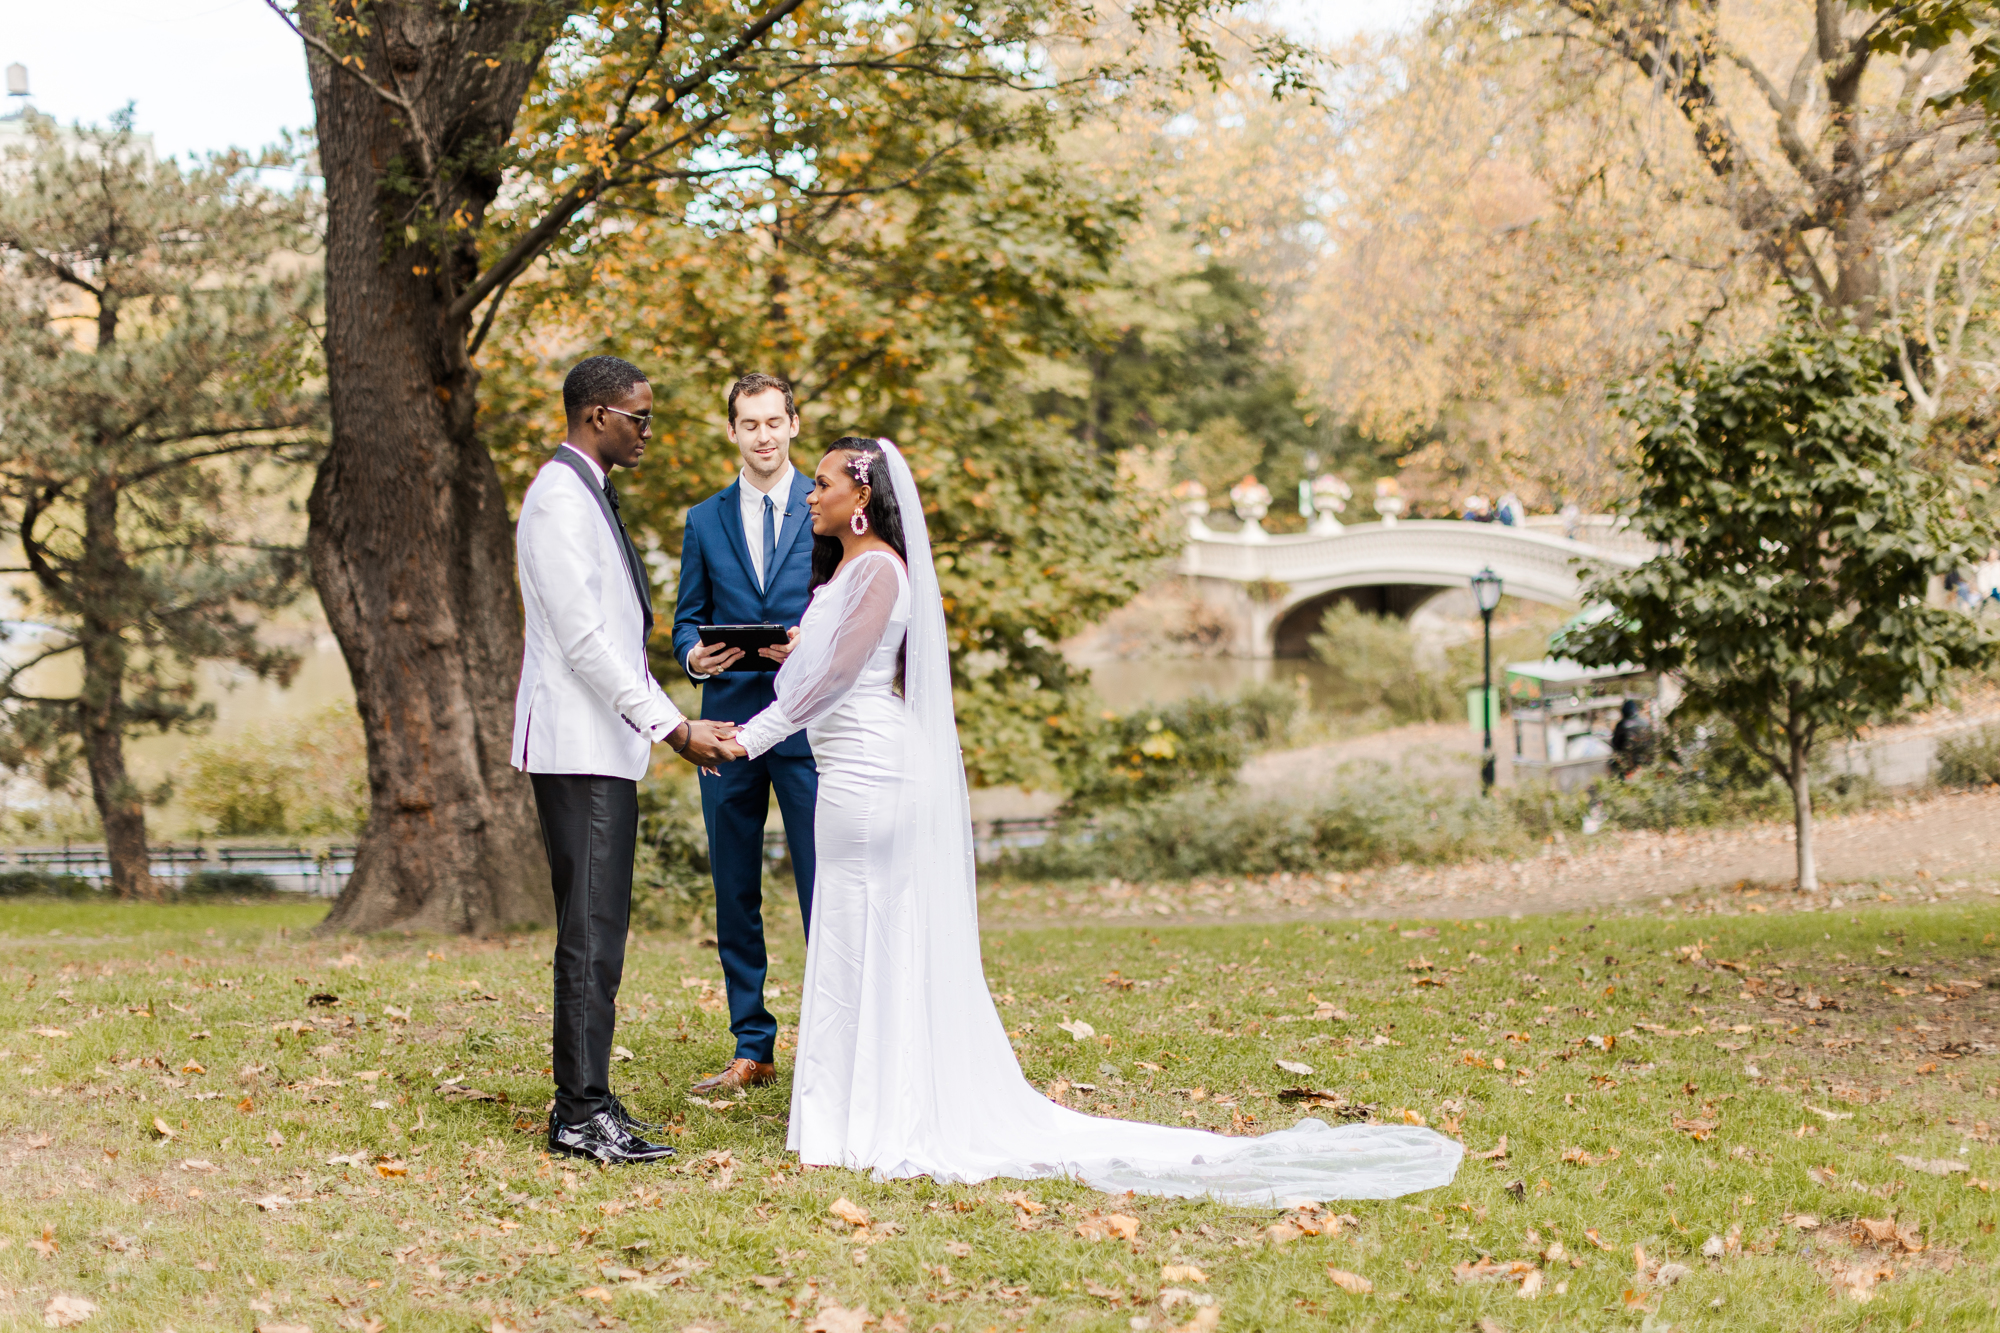 Scenic Central Park Wedding Photos on Cherry Hill in Fall